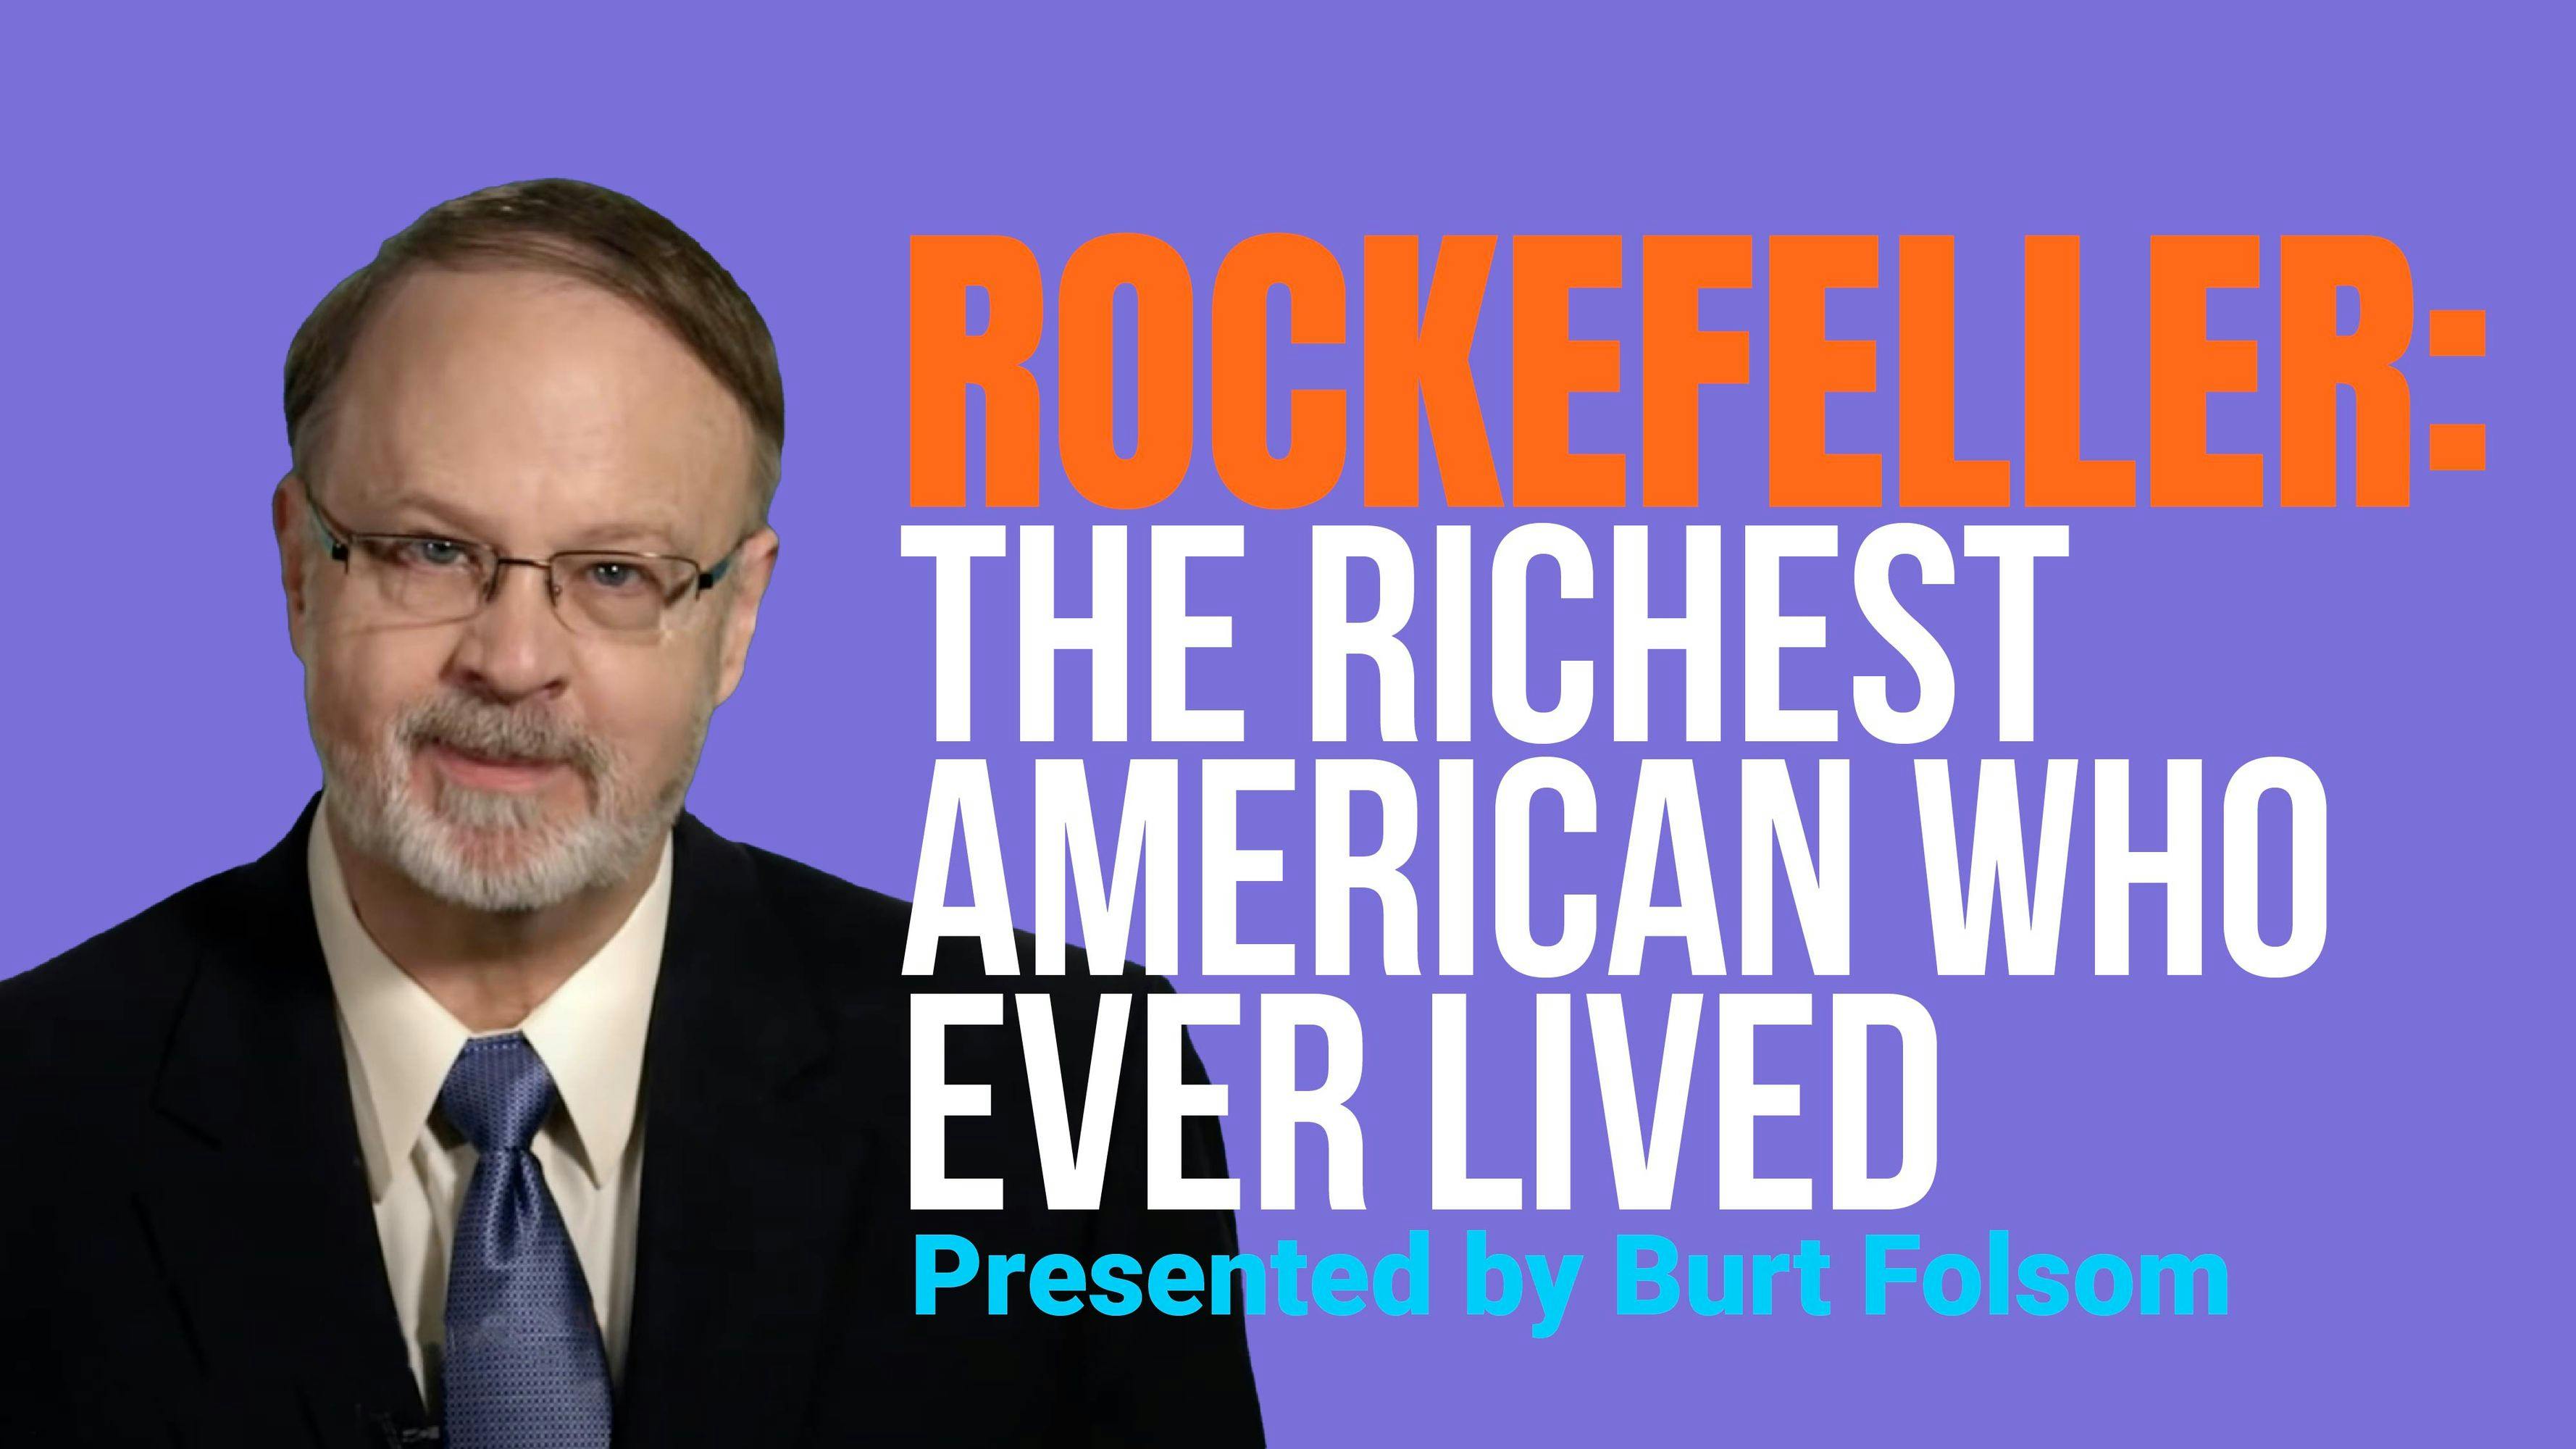 Rockefeller: The Richest American Who Ever Lived